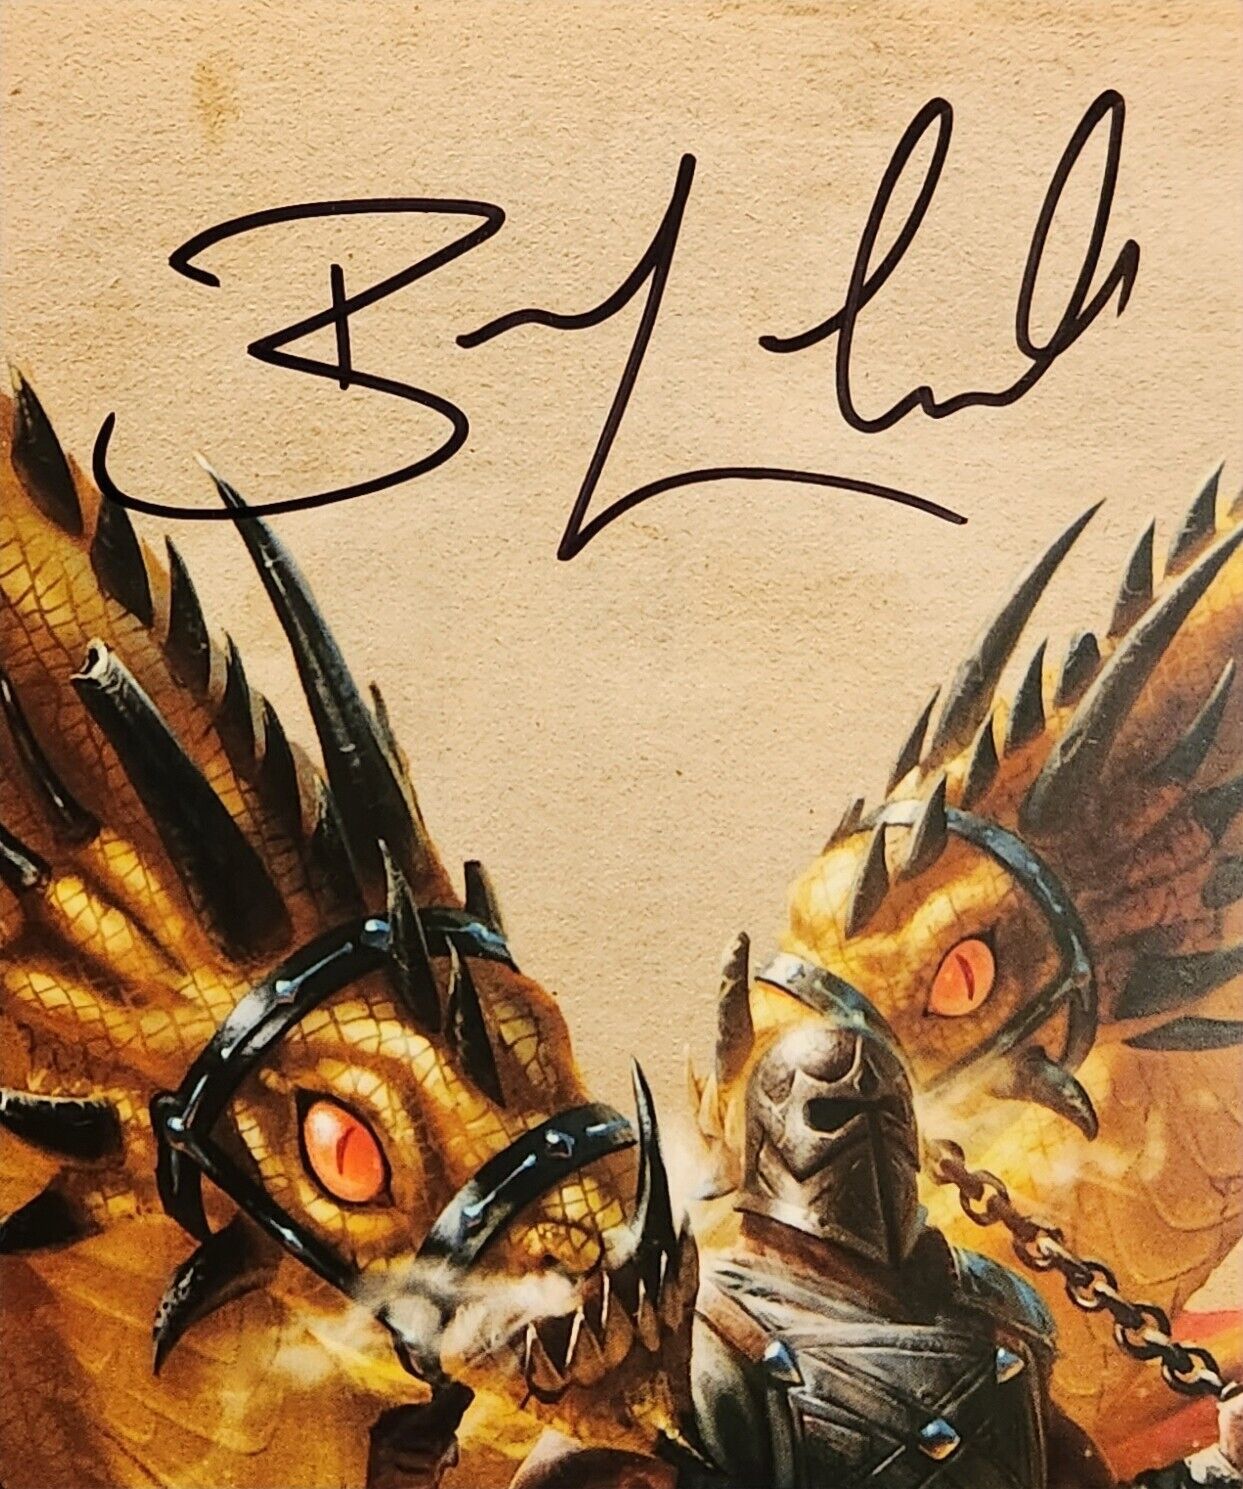 SIGNED Brandon Mull Sticker from Barnes & Noble Author